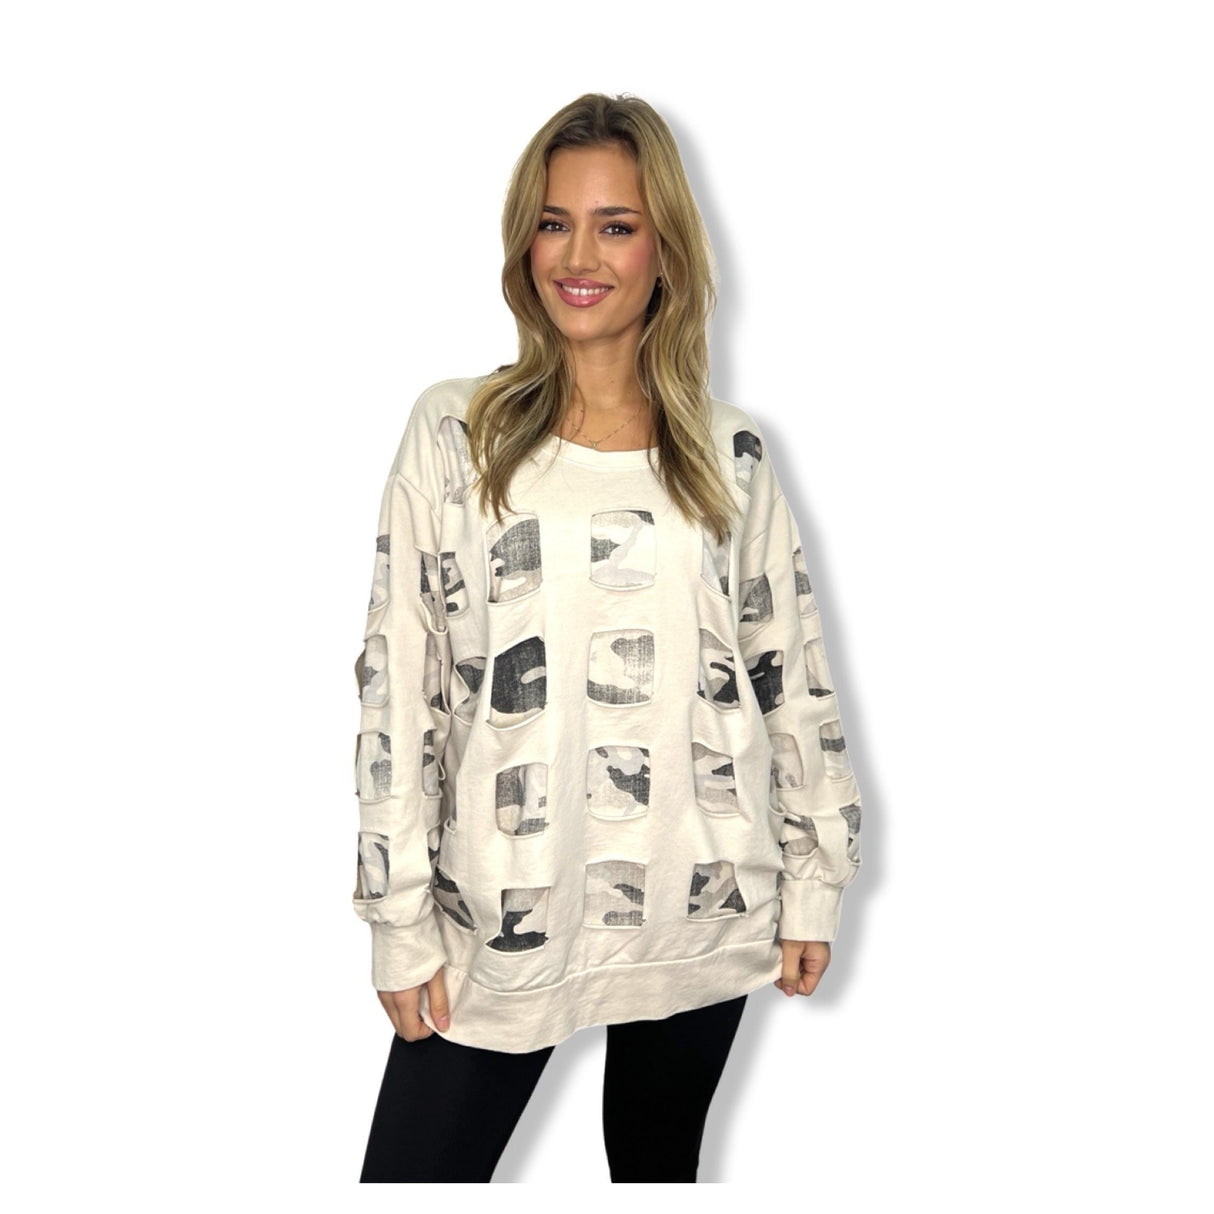 DOUBLE LAYERS SQ CUTOUT DESIGN CAMOUFLAGE SWEATSHIRTS 100% COTTON ONESIZE FITS ALL 10-20